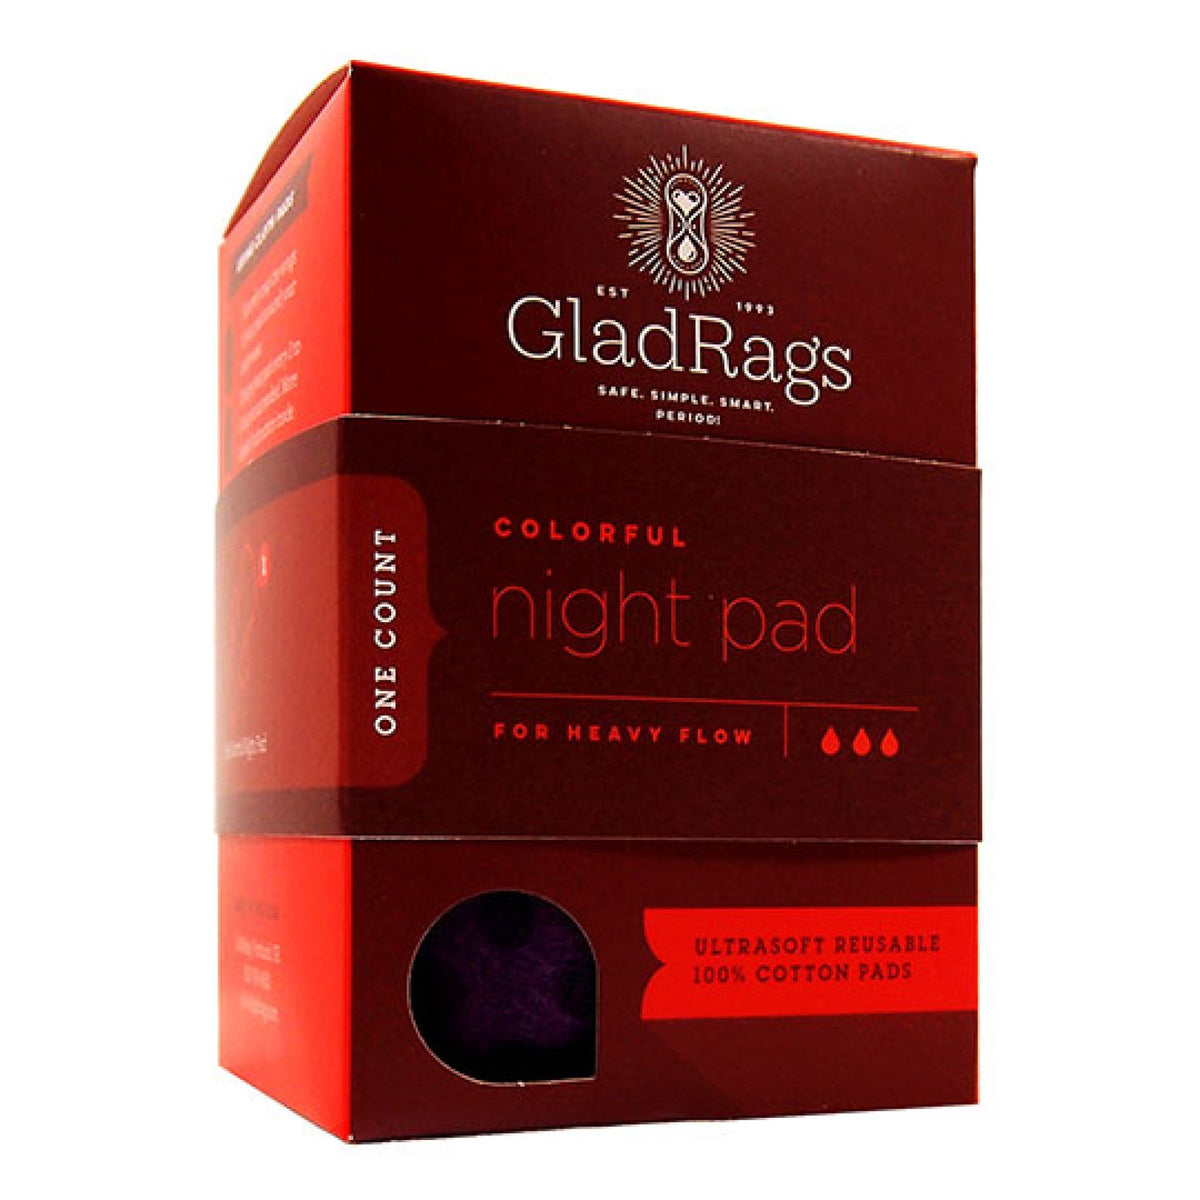 Glad Rags Night Pad Assorted Colors 1 Pack